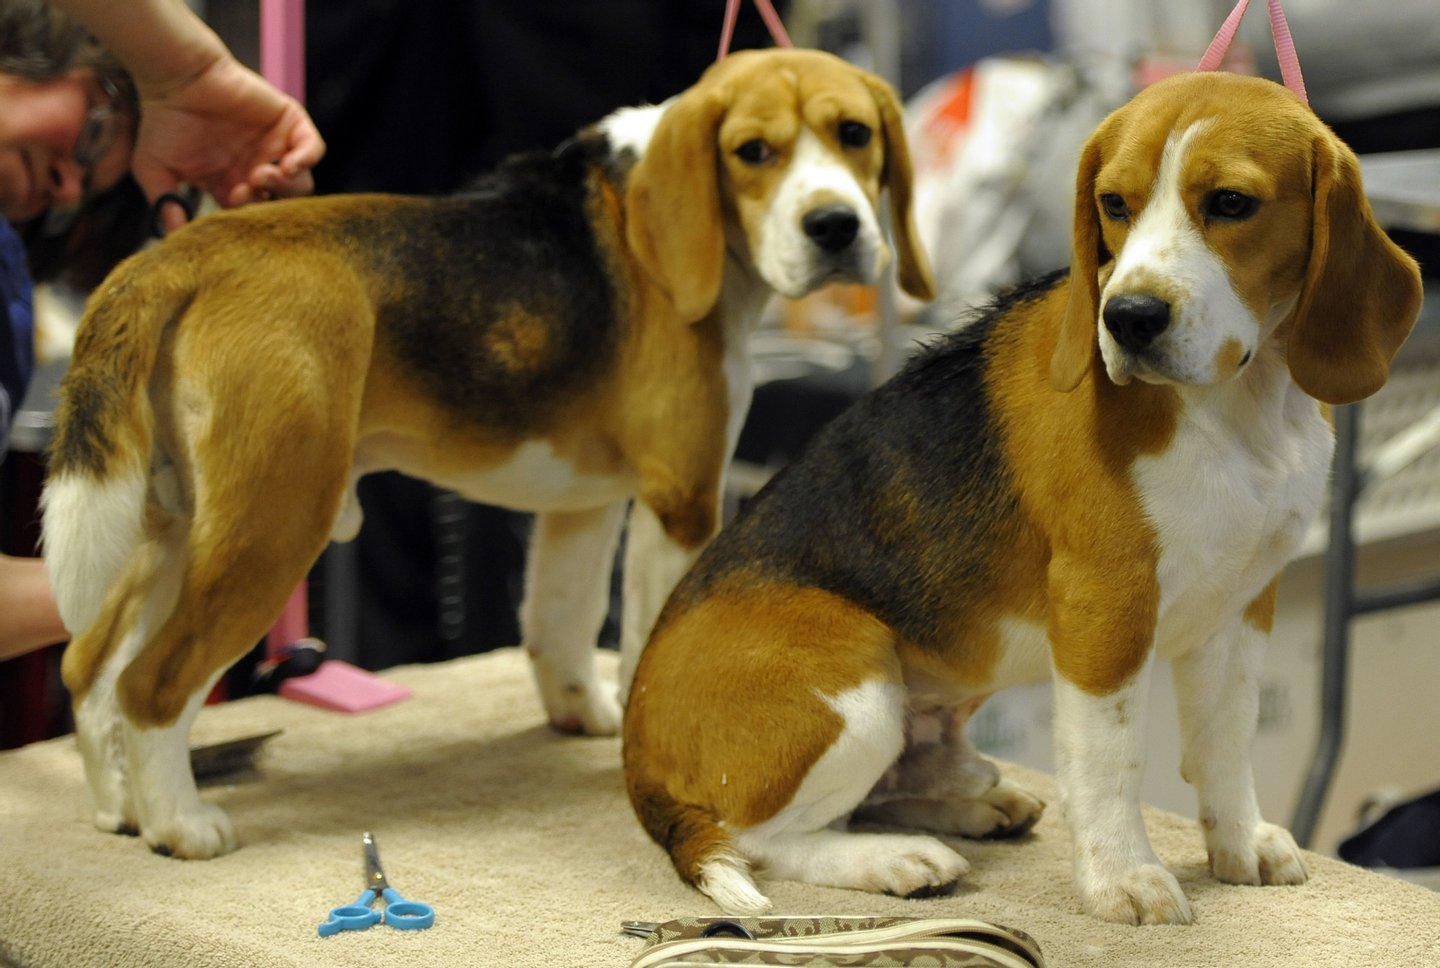 A pair of Beagles on the grooming table during the 136th Westminster Kennel Club Annual Dog Show held at Madison Square Garden. February 13, 2012. AFP PHOTO / TIMOTHY A. CLARY (Photo credit should read TIMOTHY A. CLARY/AFP/Getty Images)